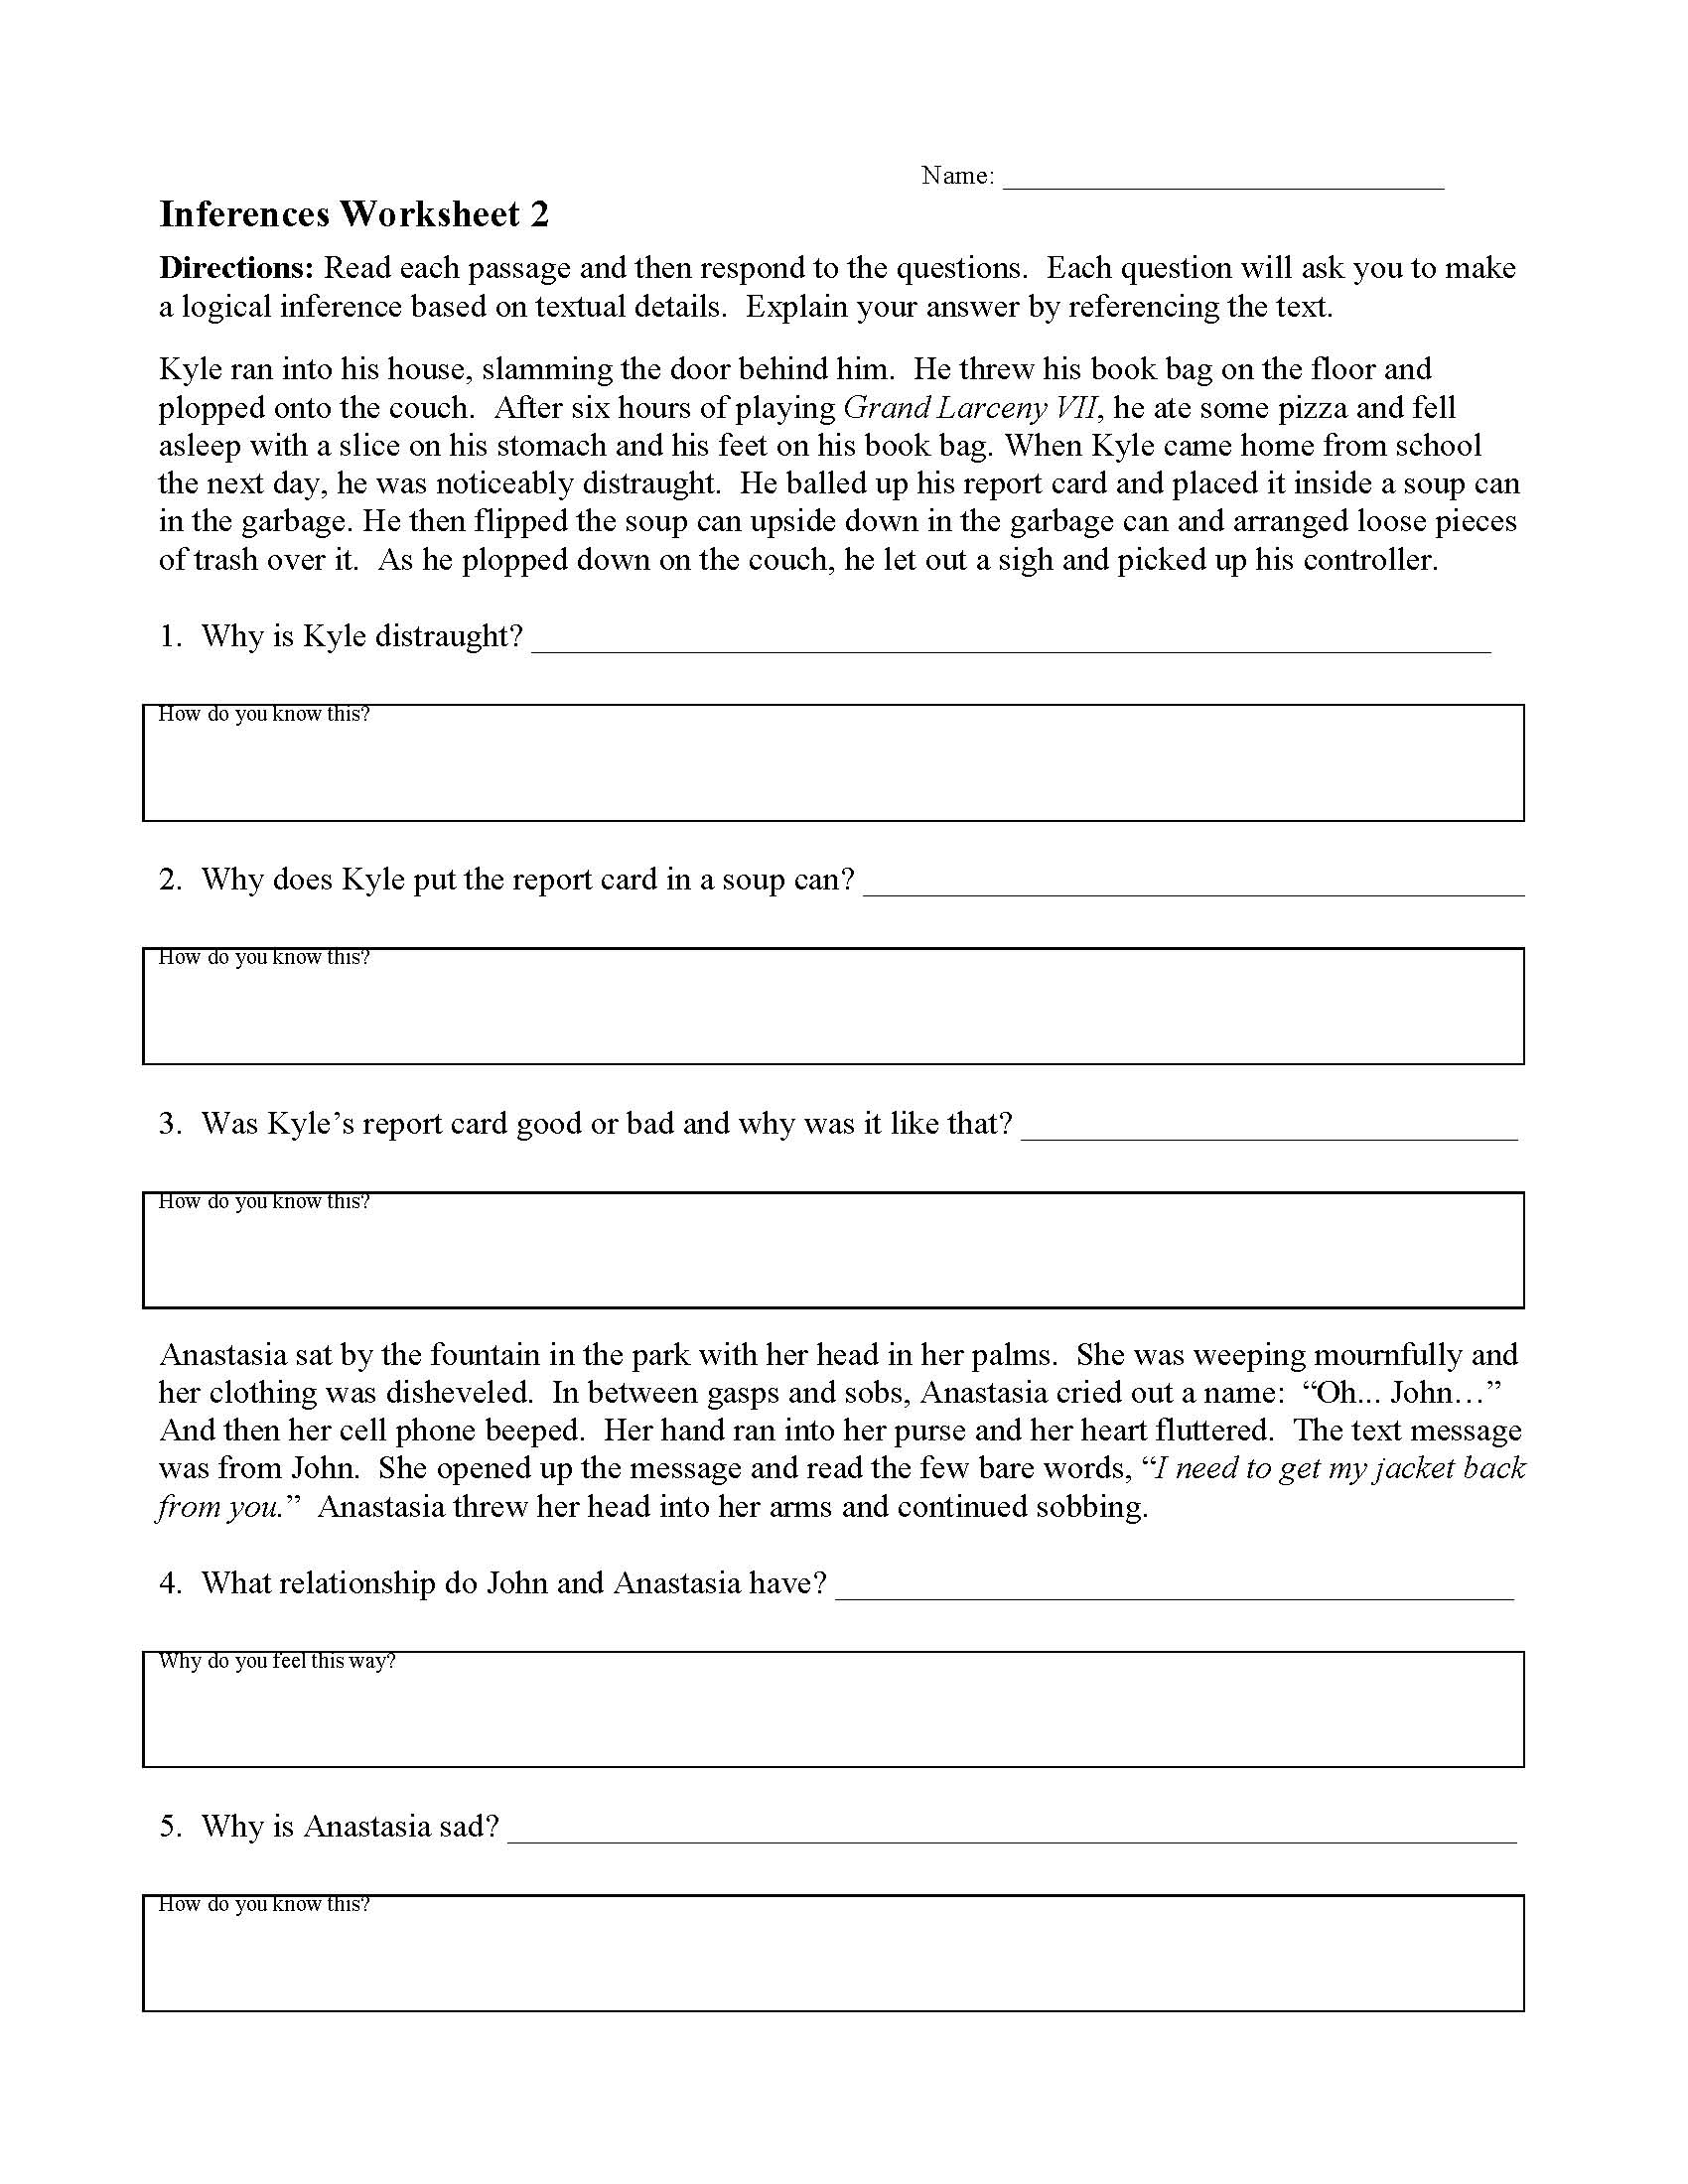 Inferences Worksheets  Ereading Worksheets With Citing Textual Evidence Worksheet